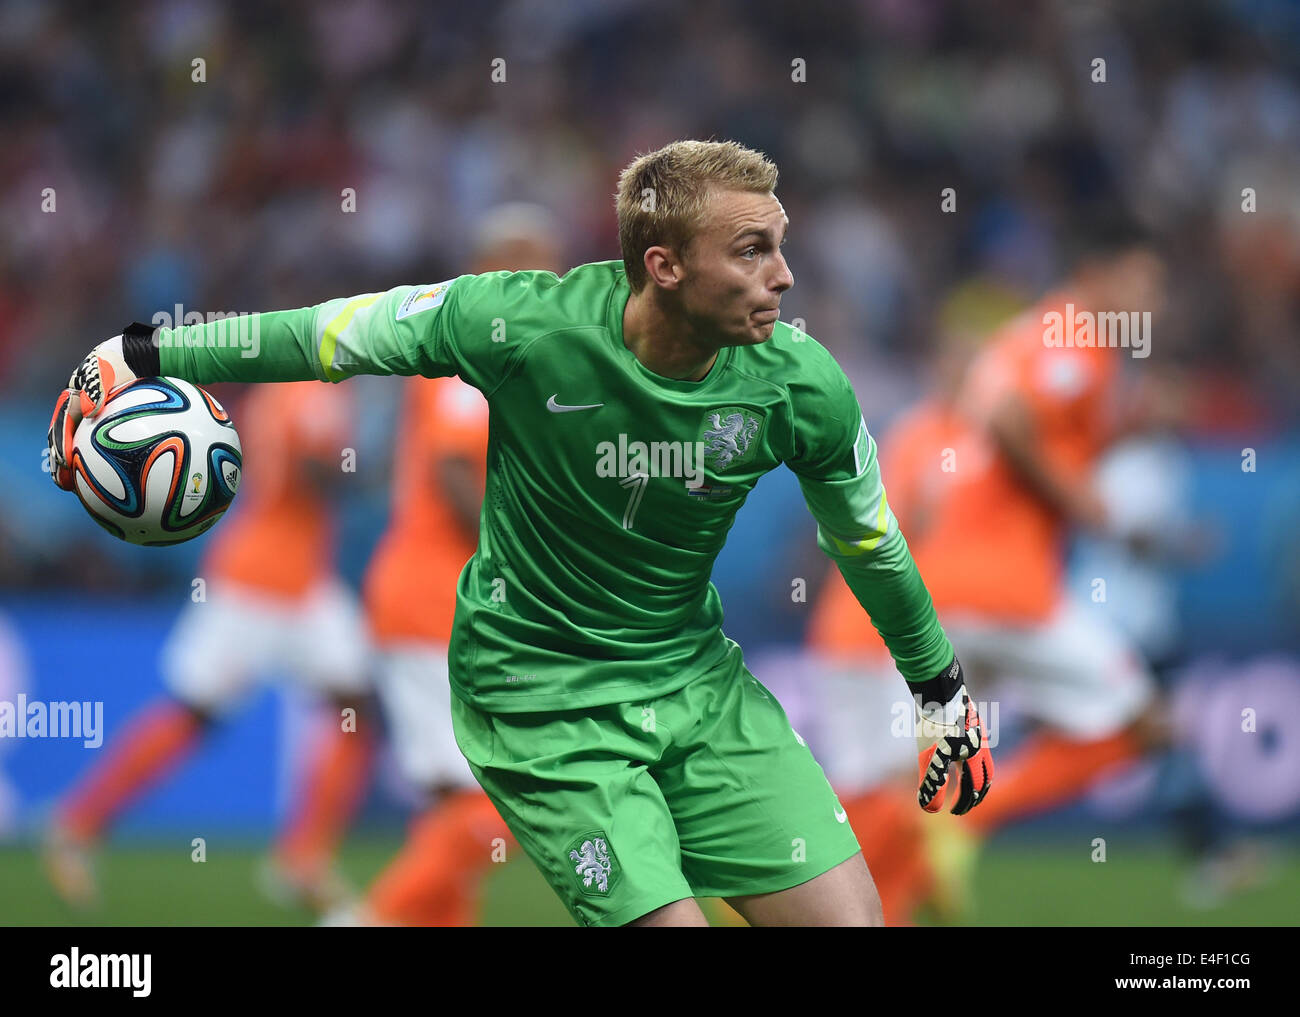 Sao Paulo, Brazil. 09th July, 2014. Goalkeeper Jasper Cillessen of the Netherlands in action during the FIFA World Cup 2014 semi-final soccer match between the Netherlands and Argentina at the Arena Corinthians in Sao Paulo, Brazil, 09 July 2014. Photo: Marius Becker/dpa/Alamy Live News Stock Photo